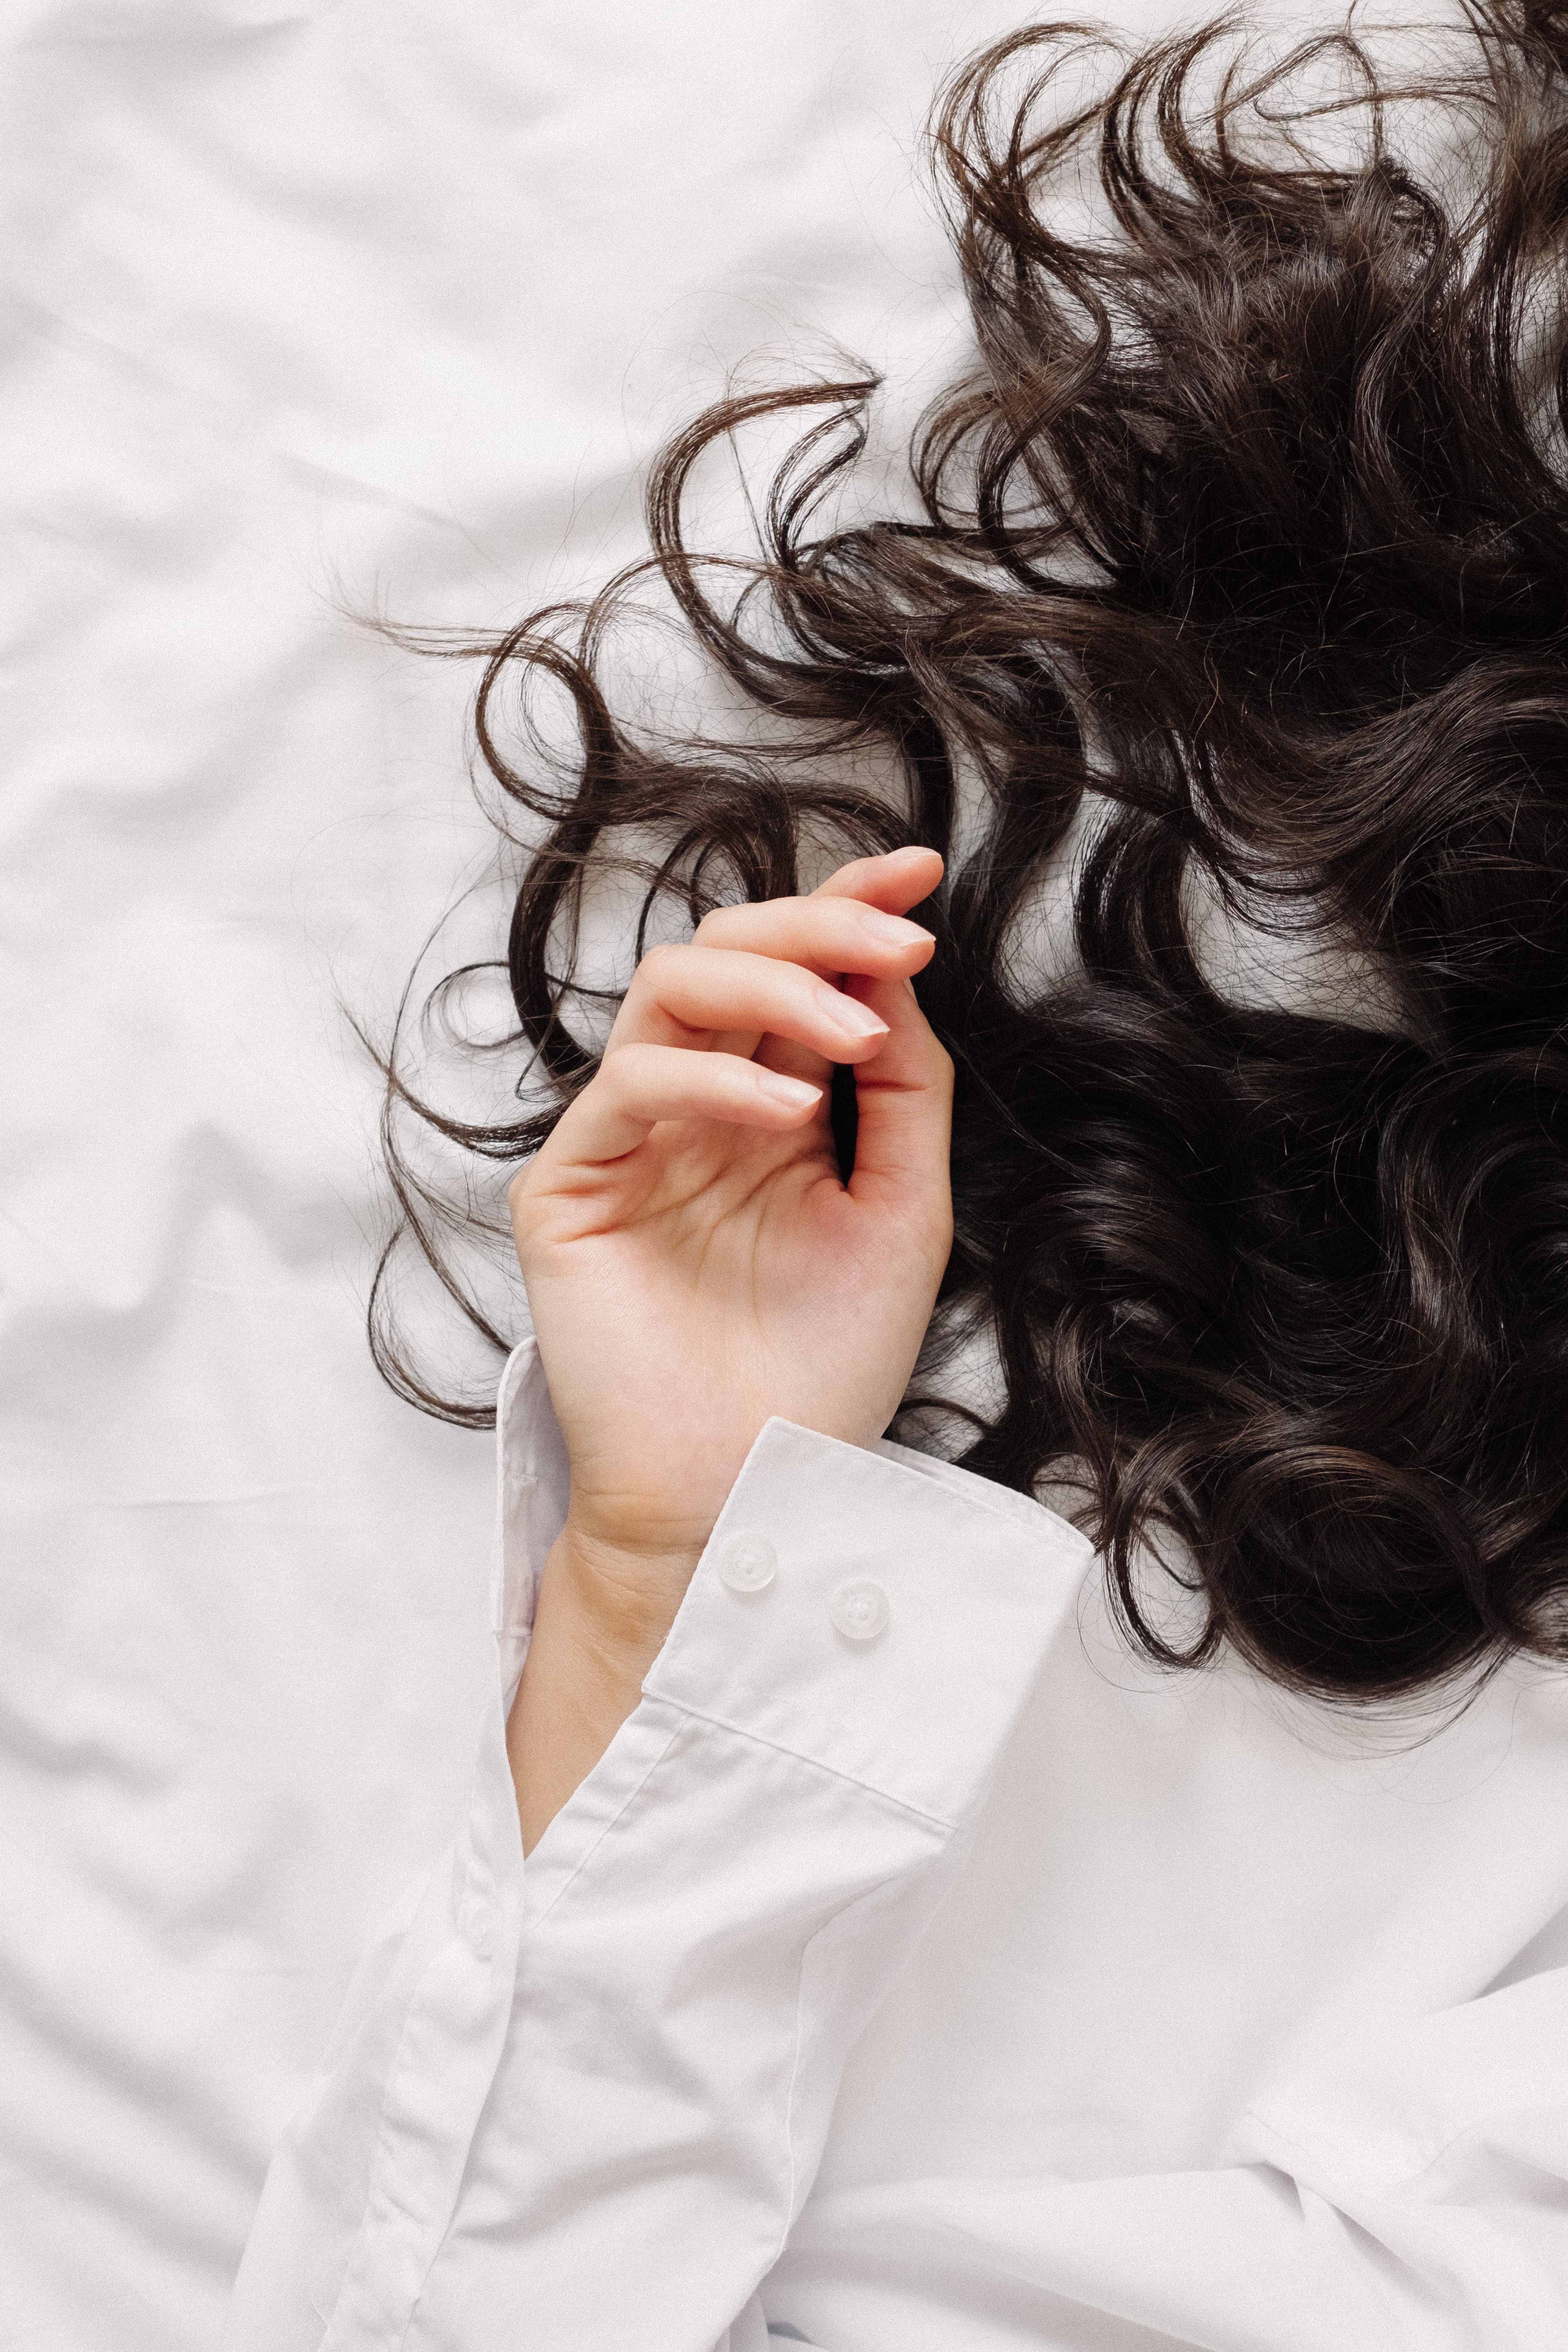 A Half Of a Woman Body Showing Her Hand And Her Hair In A bed